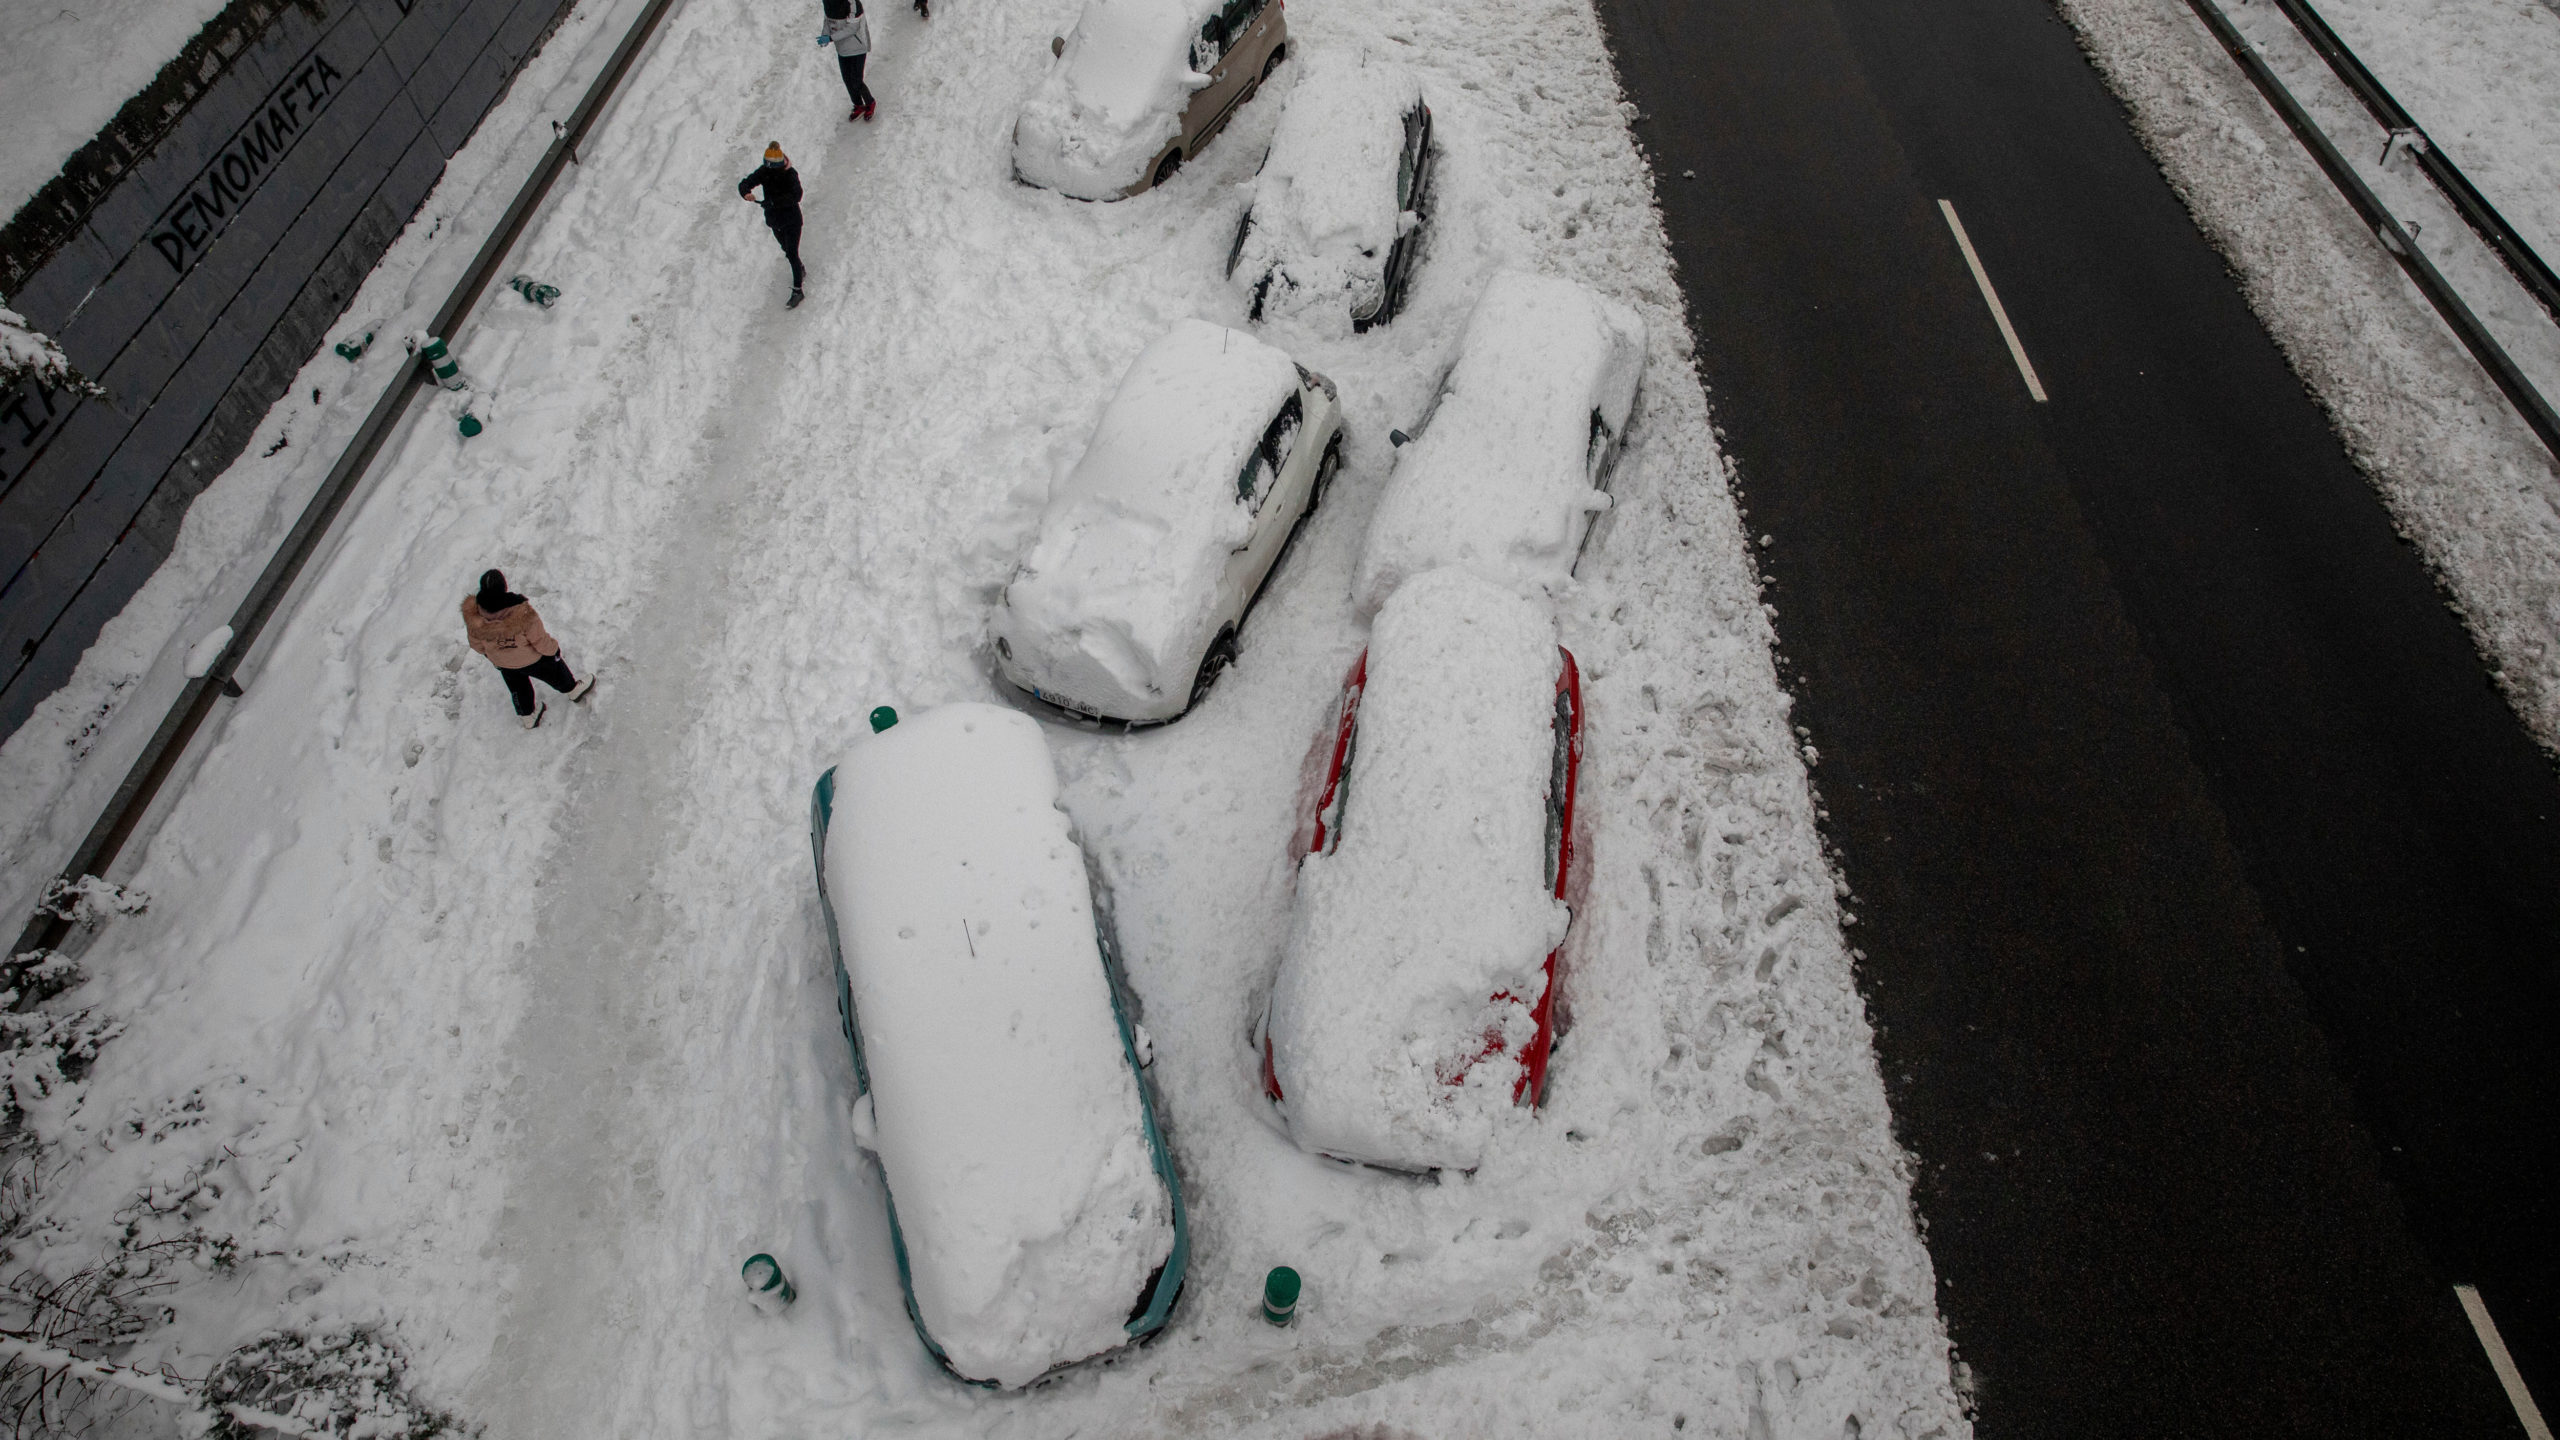 Cars are blocked on the snow as people walk past along the M-30 road during heavy snowfall on January 09, 2021 in Madrid, Spain.  (Photo: Pablo Blazquez Dominguez, Getty Images)